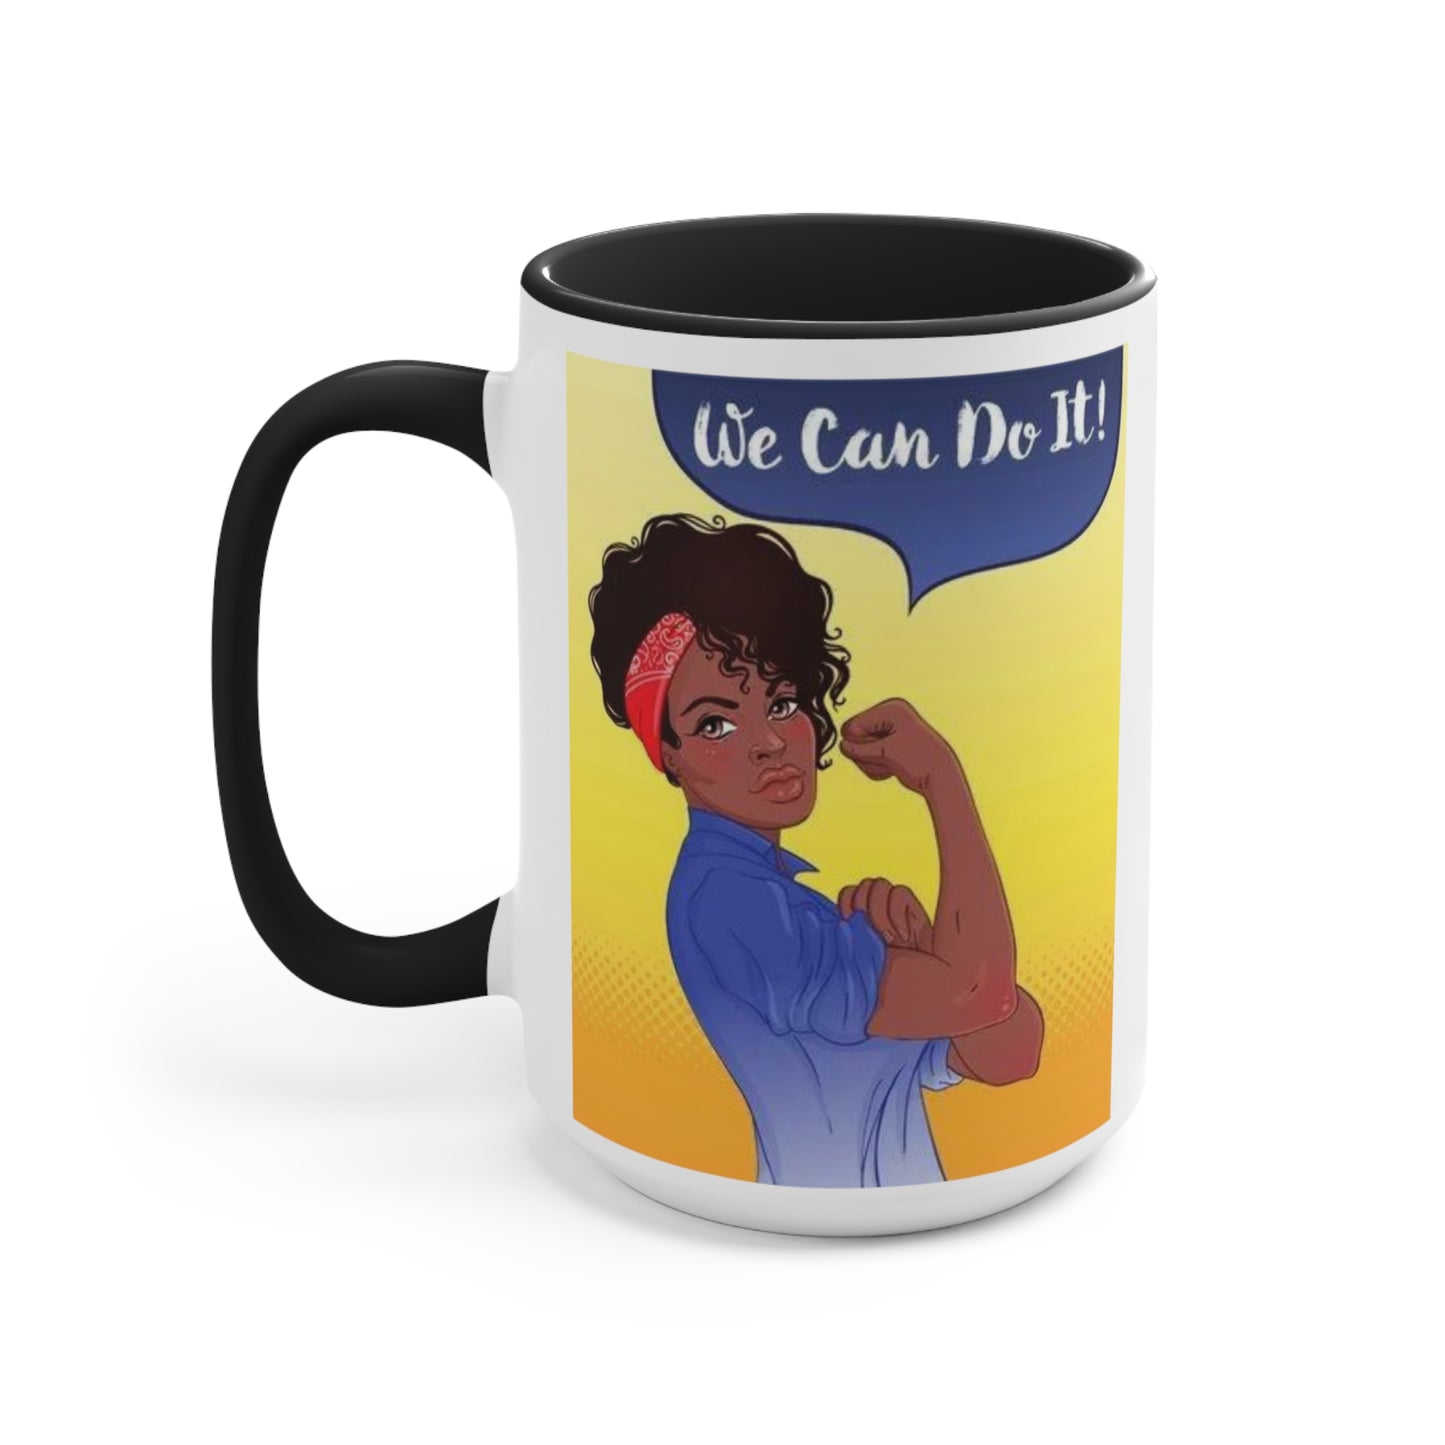 We Can Do It Ceramic Coffee Mug, teacher gift, coworker gift, unique gift, gift for mom, gift for dad, funny mug, Motivation gift